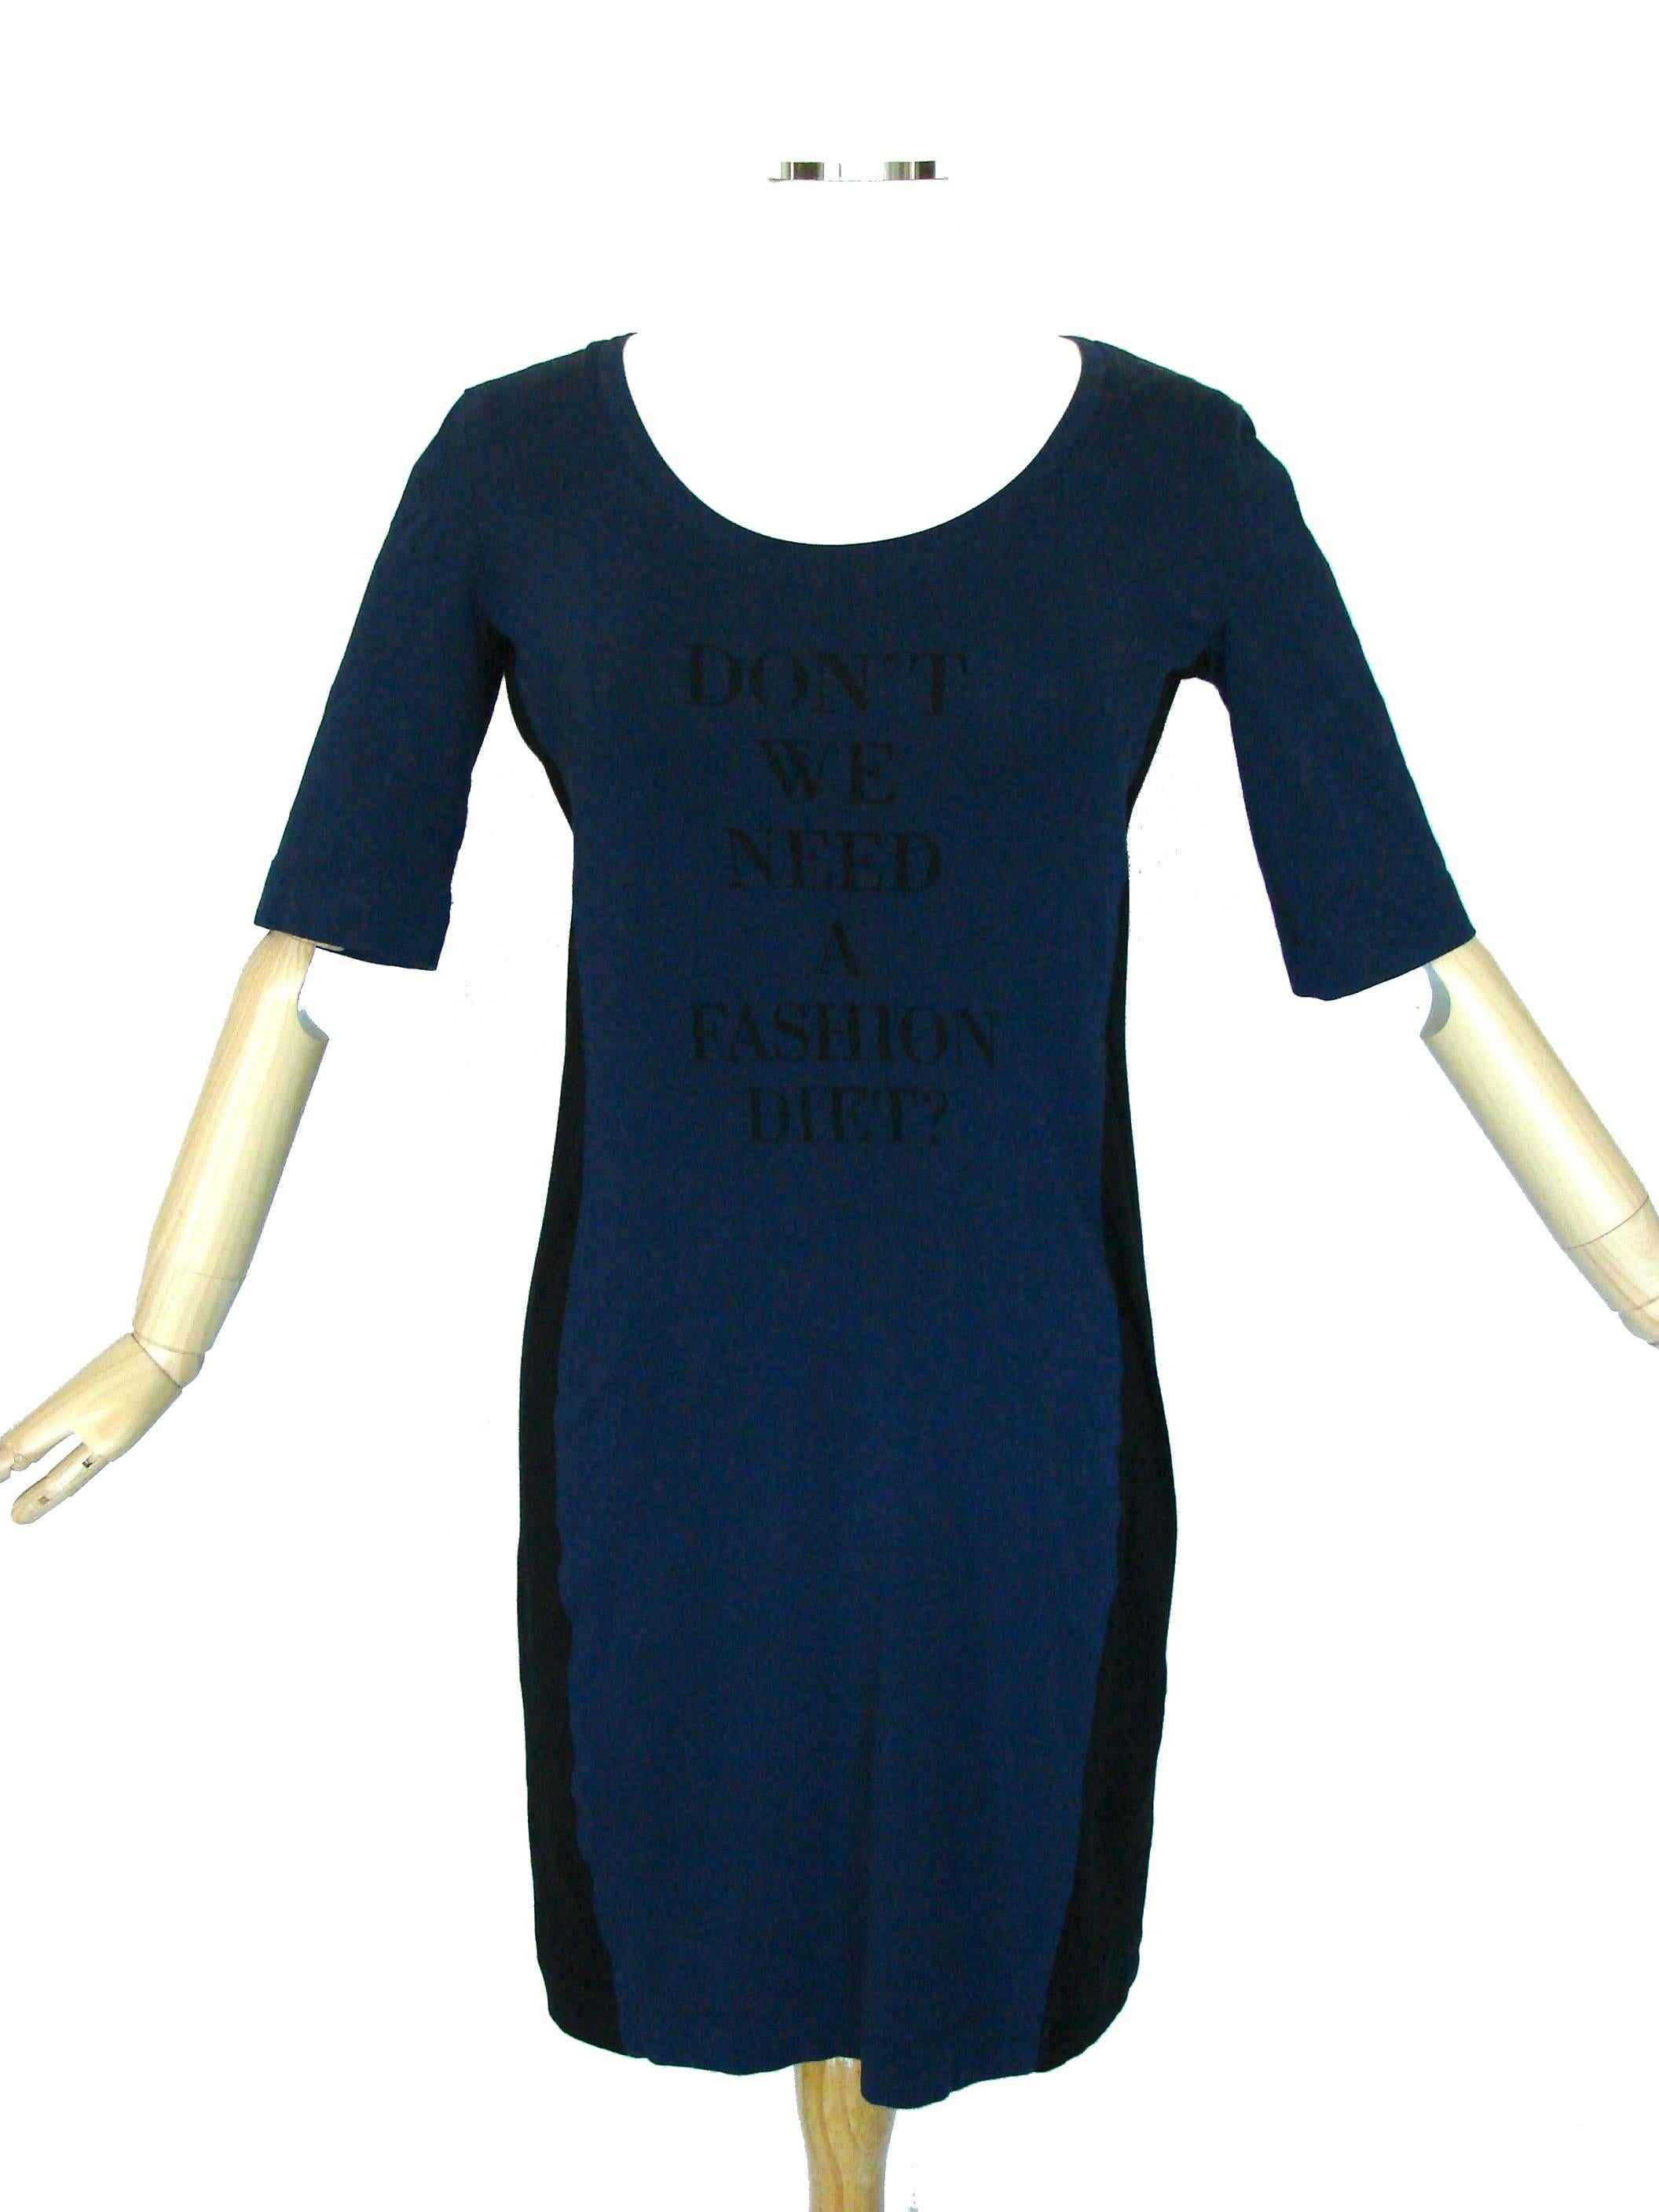 This Franco Moschino designed dress was released in the mid 1980s for his LOVE MOSCHINO line.  Made from a cotton and elastane blend fabric in blue, it features black illusion panels at the sides.  In good condition.  Tagged US 8, it measures,